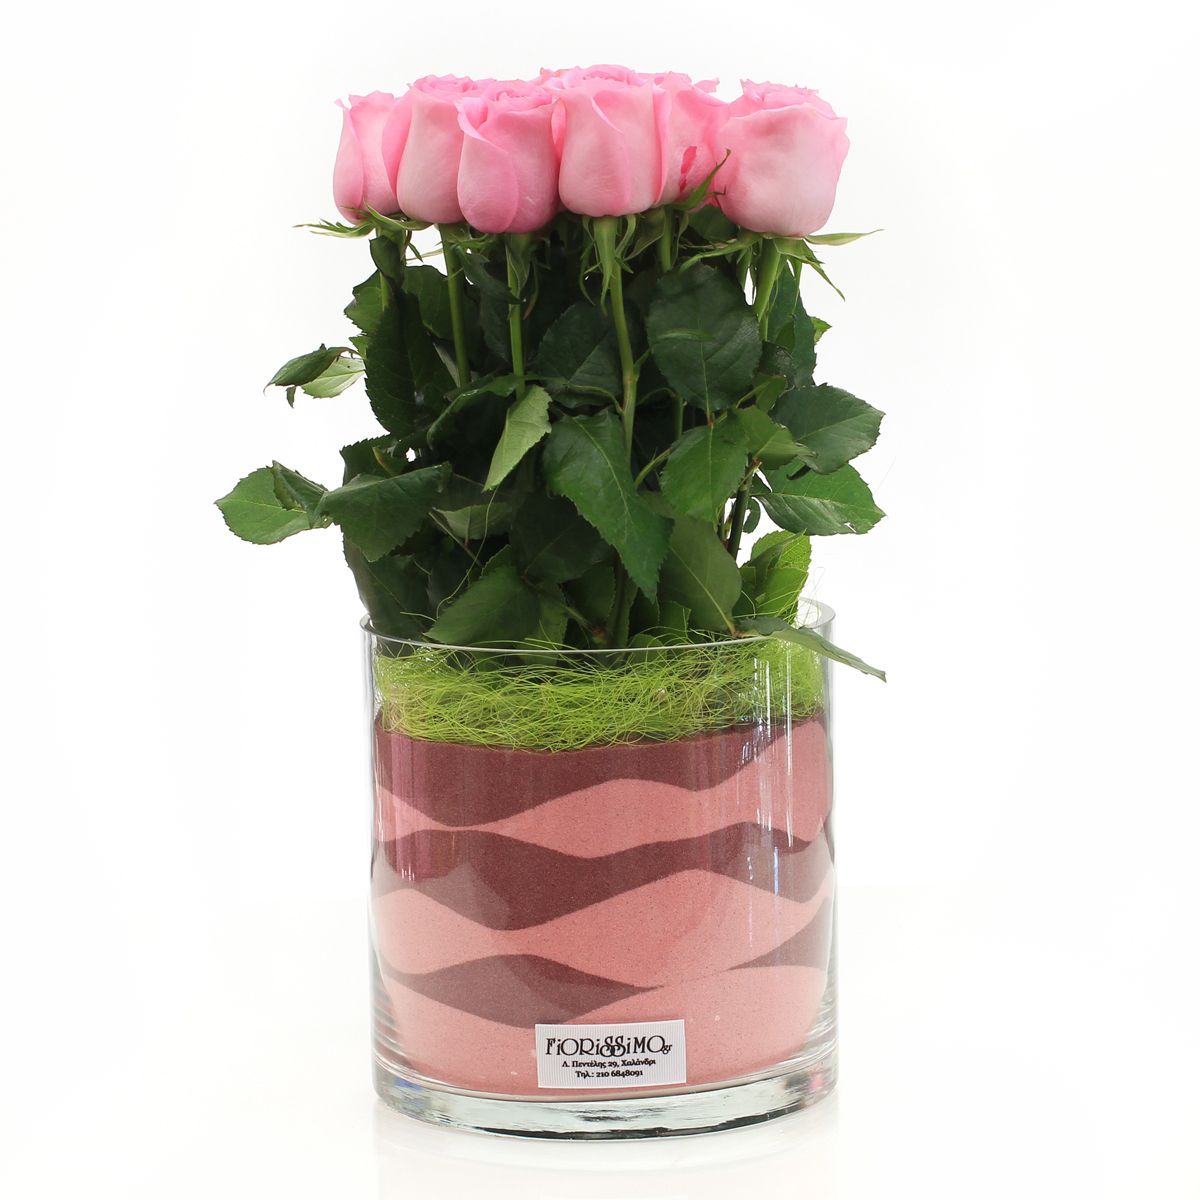 Harmony with pink roses in a glass